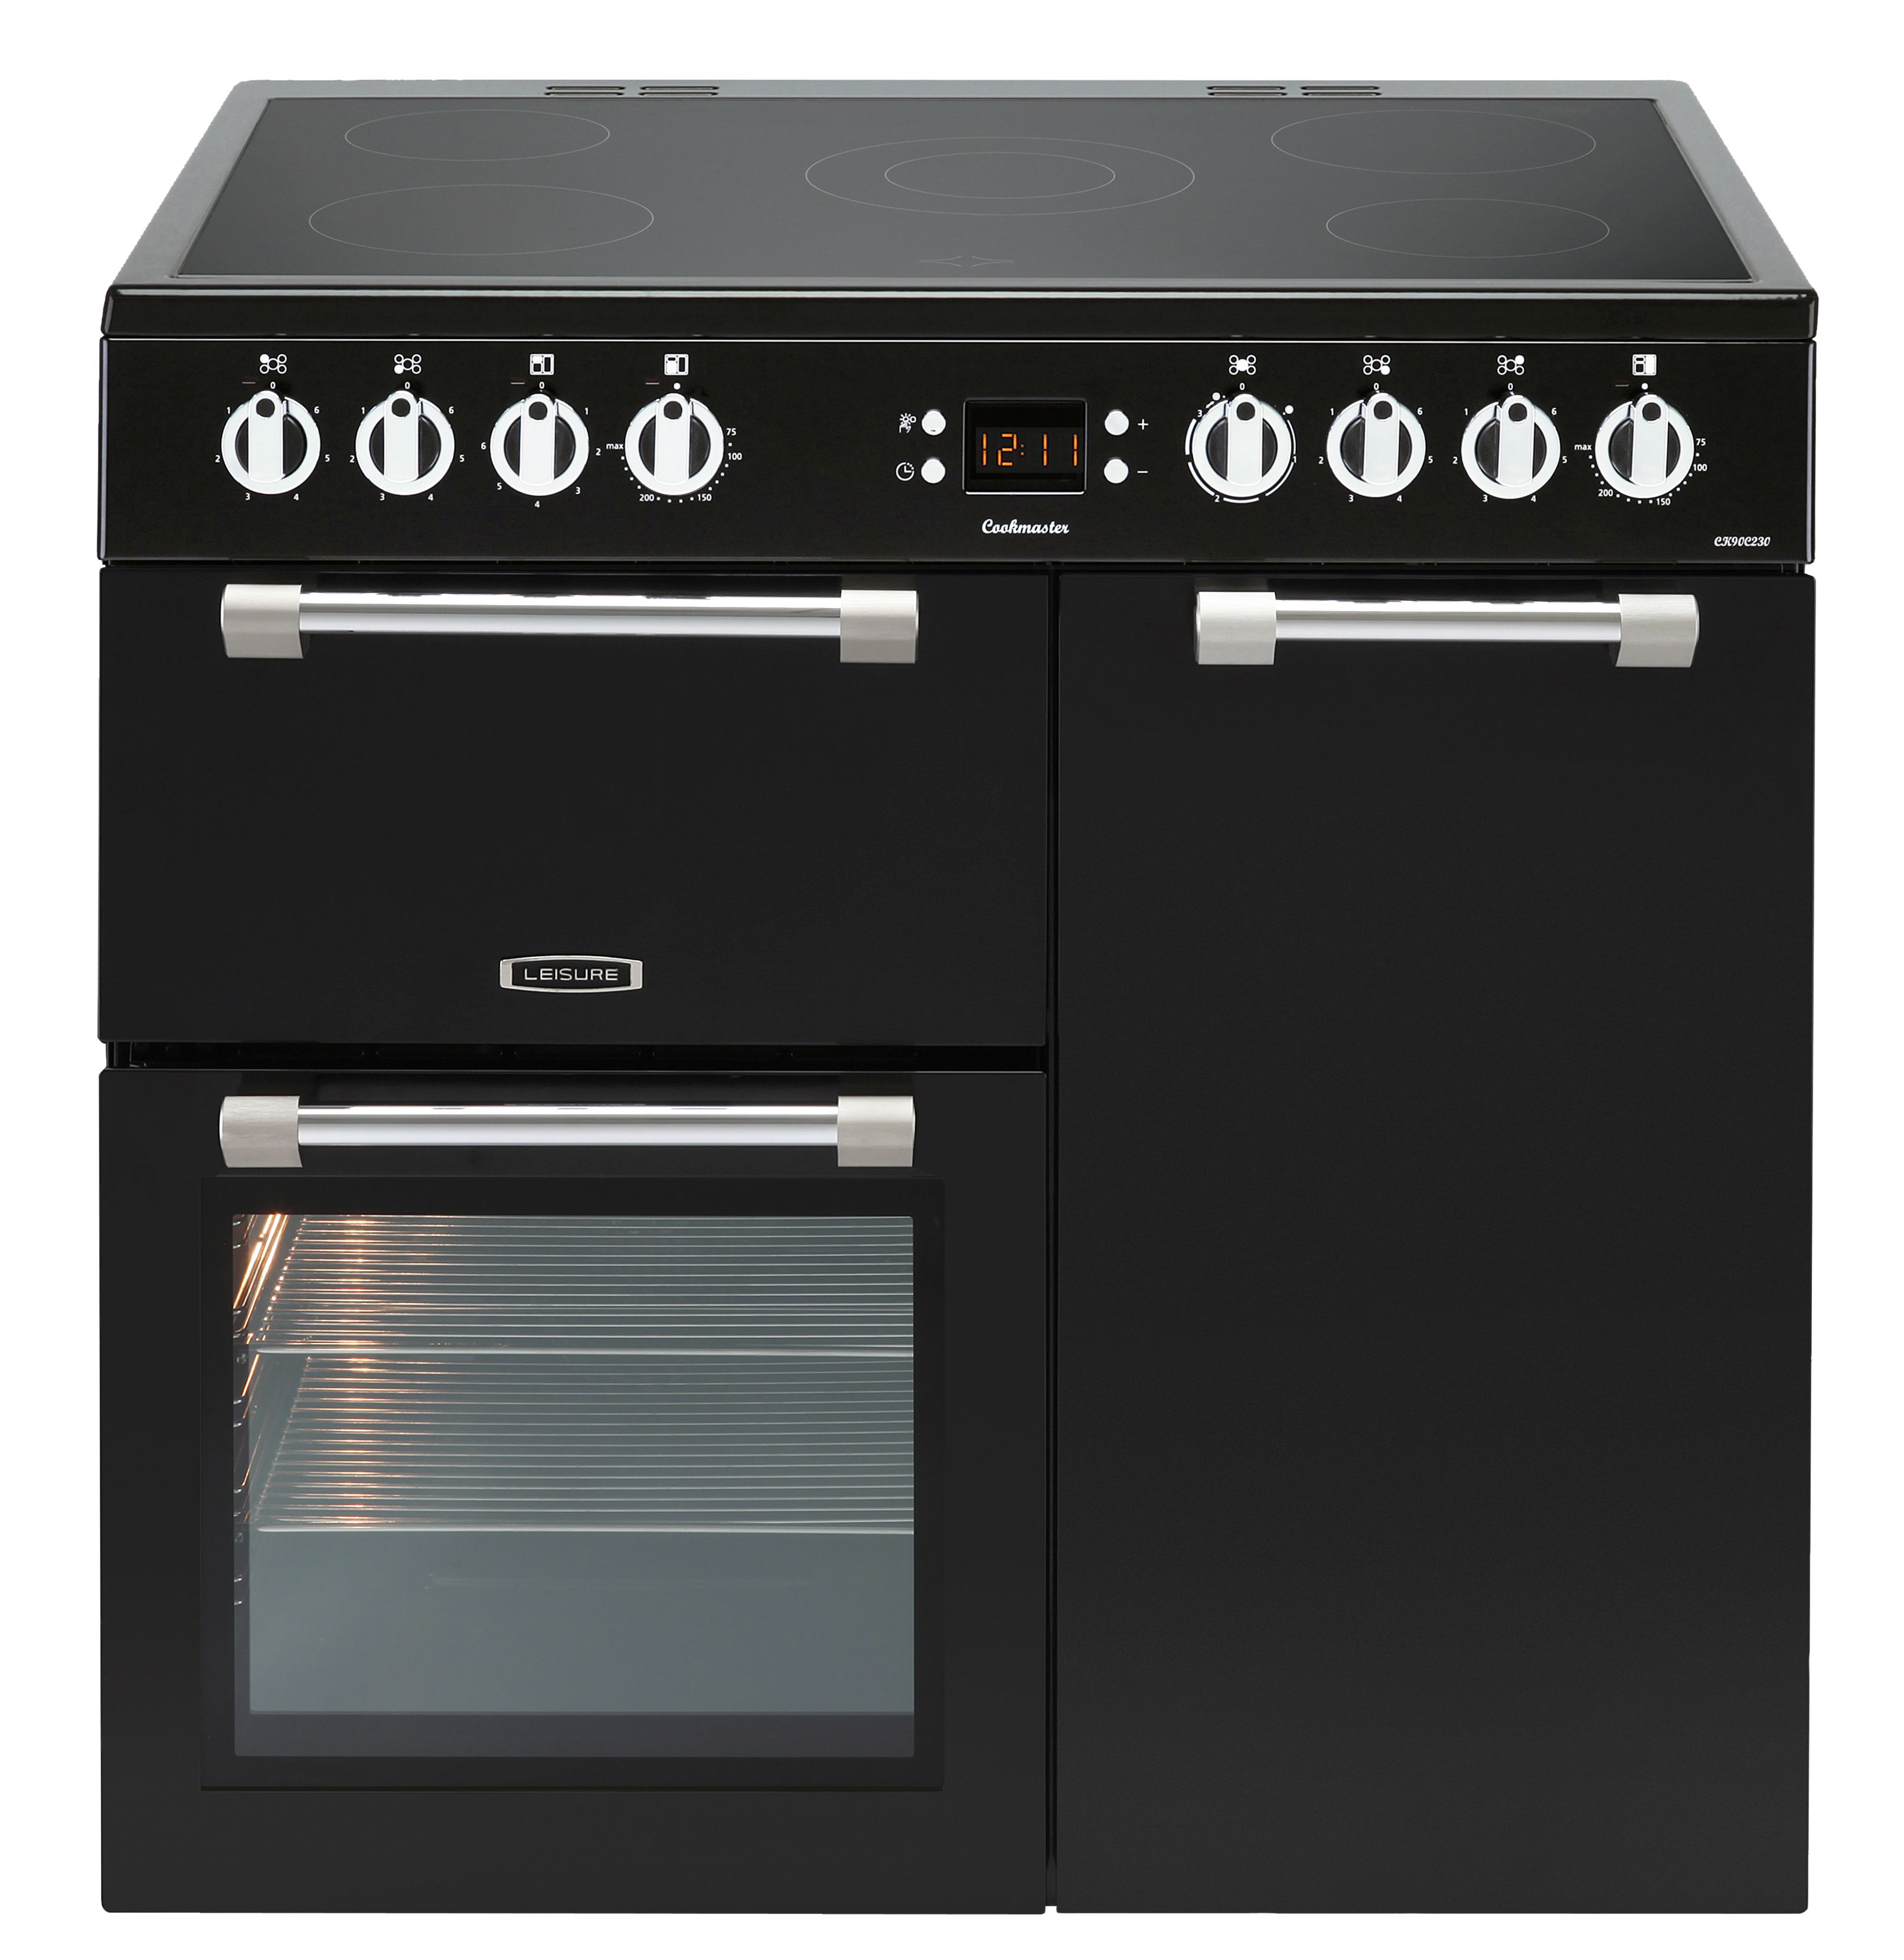 Leisure Cookmaster CK90C230S Freestanding Electric Range cooker with